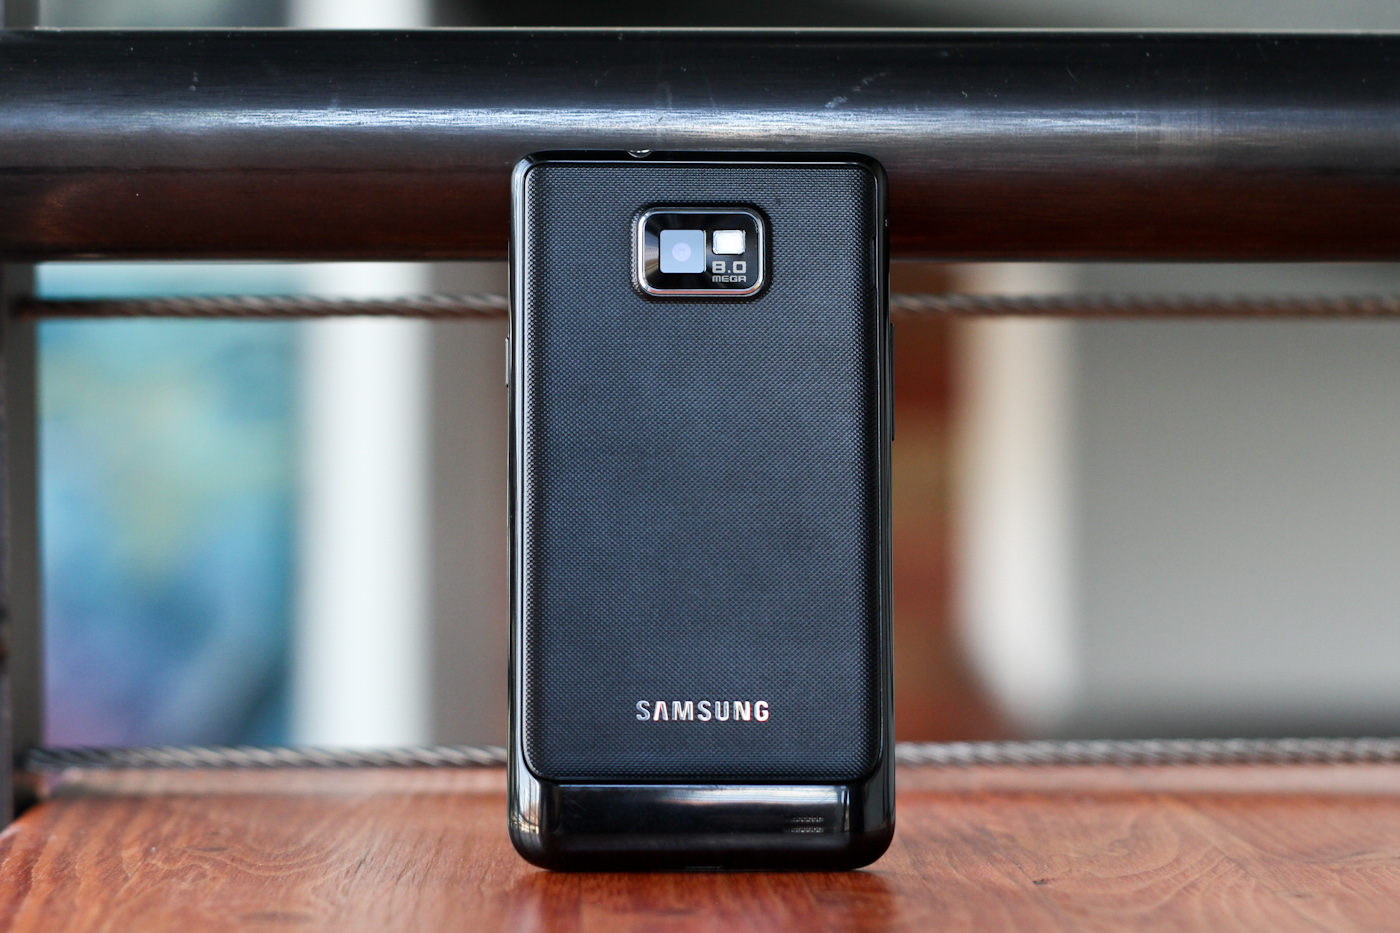 Samsung Galaxy 2 Review - The Best, Redefined